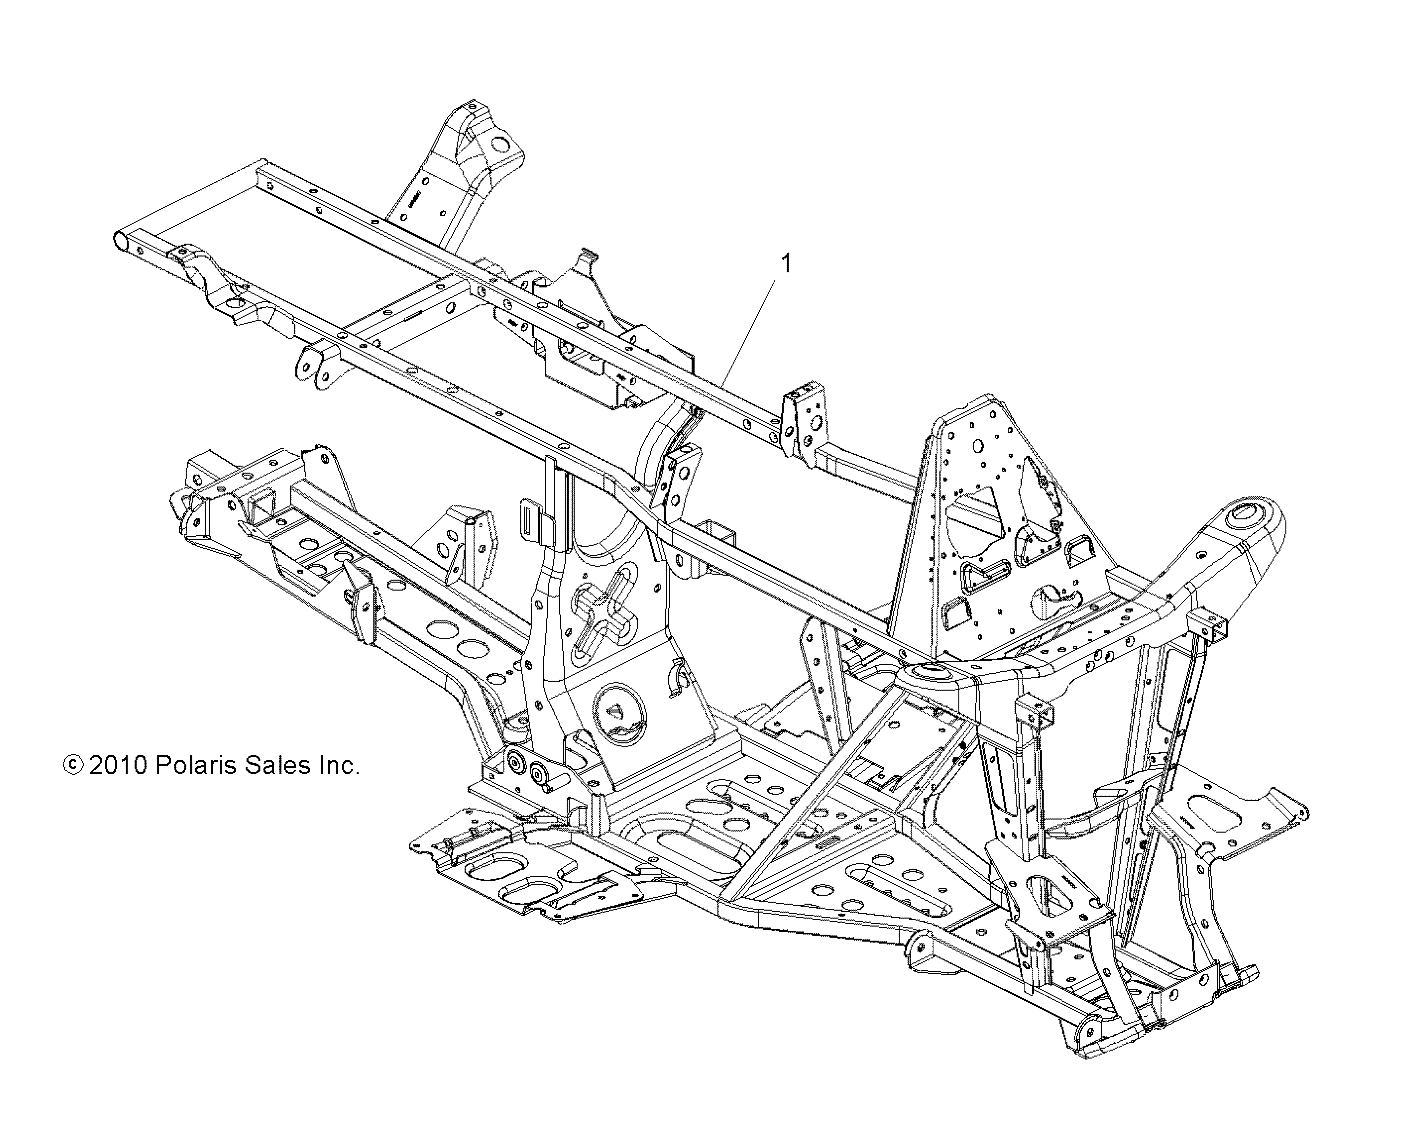 CHASSIS, FRAME - A13MB46TH (49ATVFRAME11SP500)